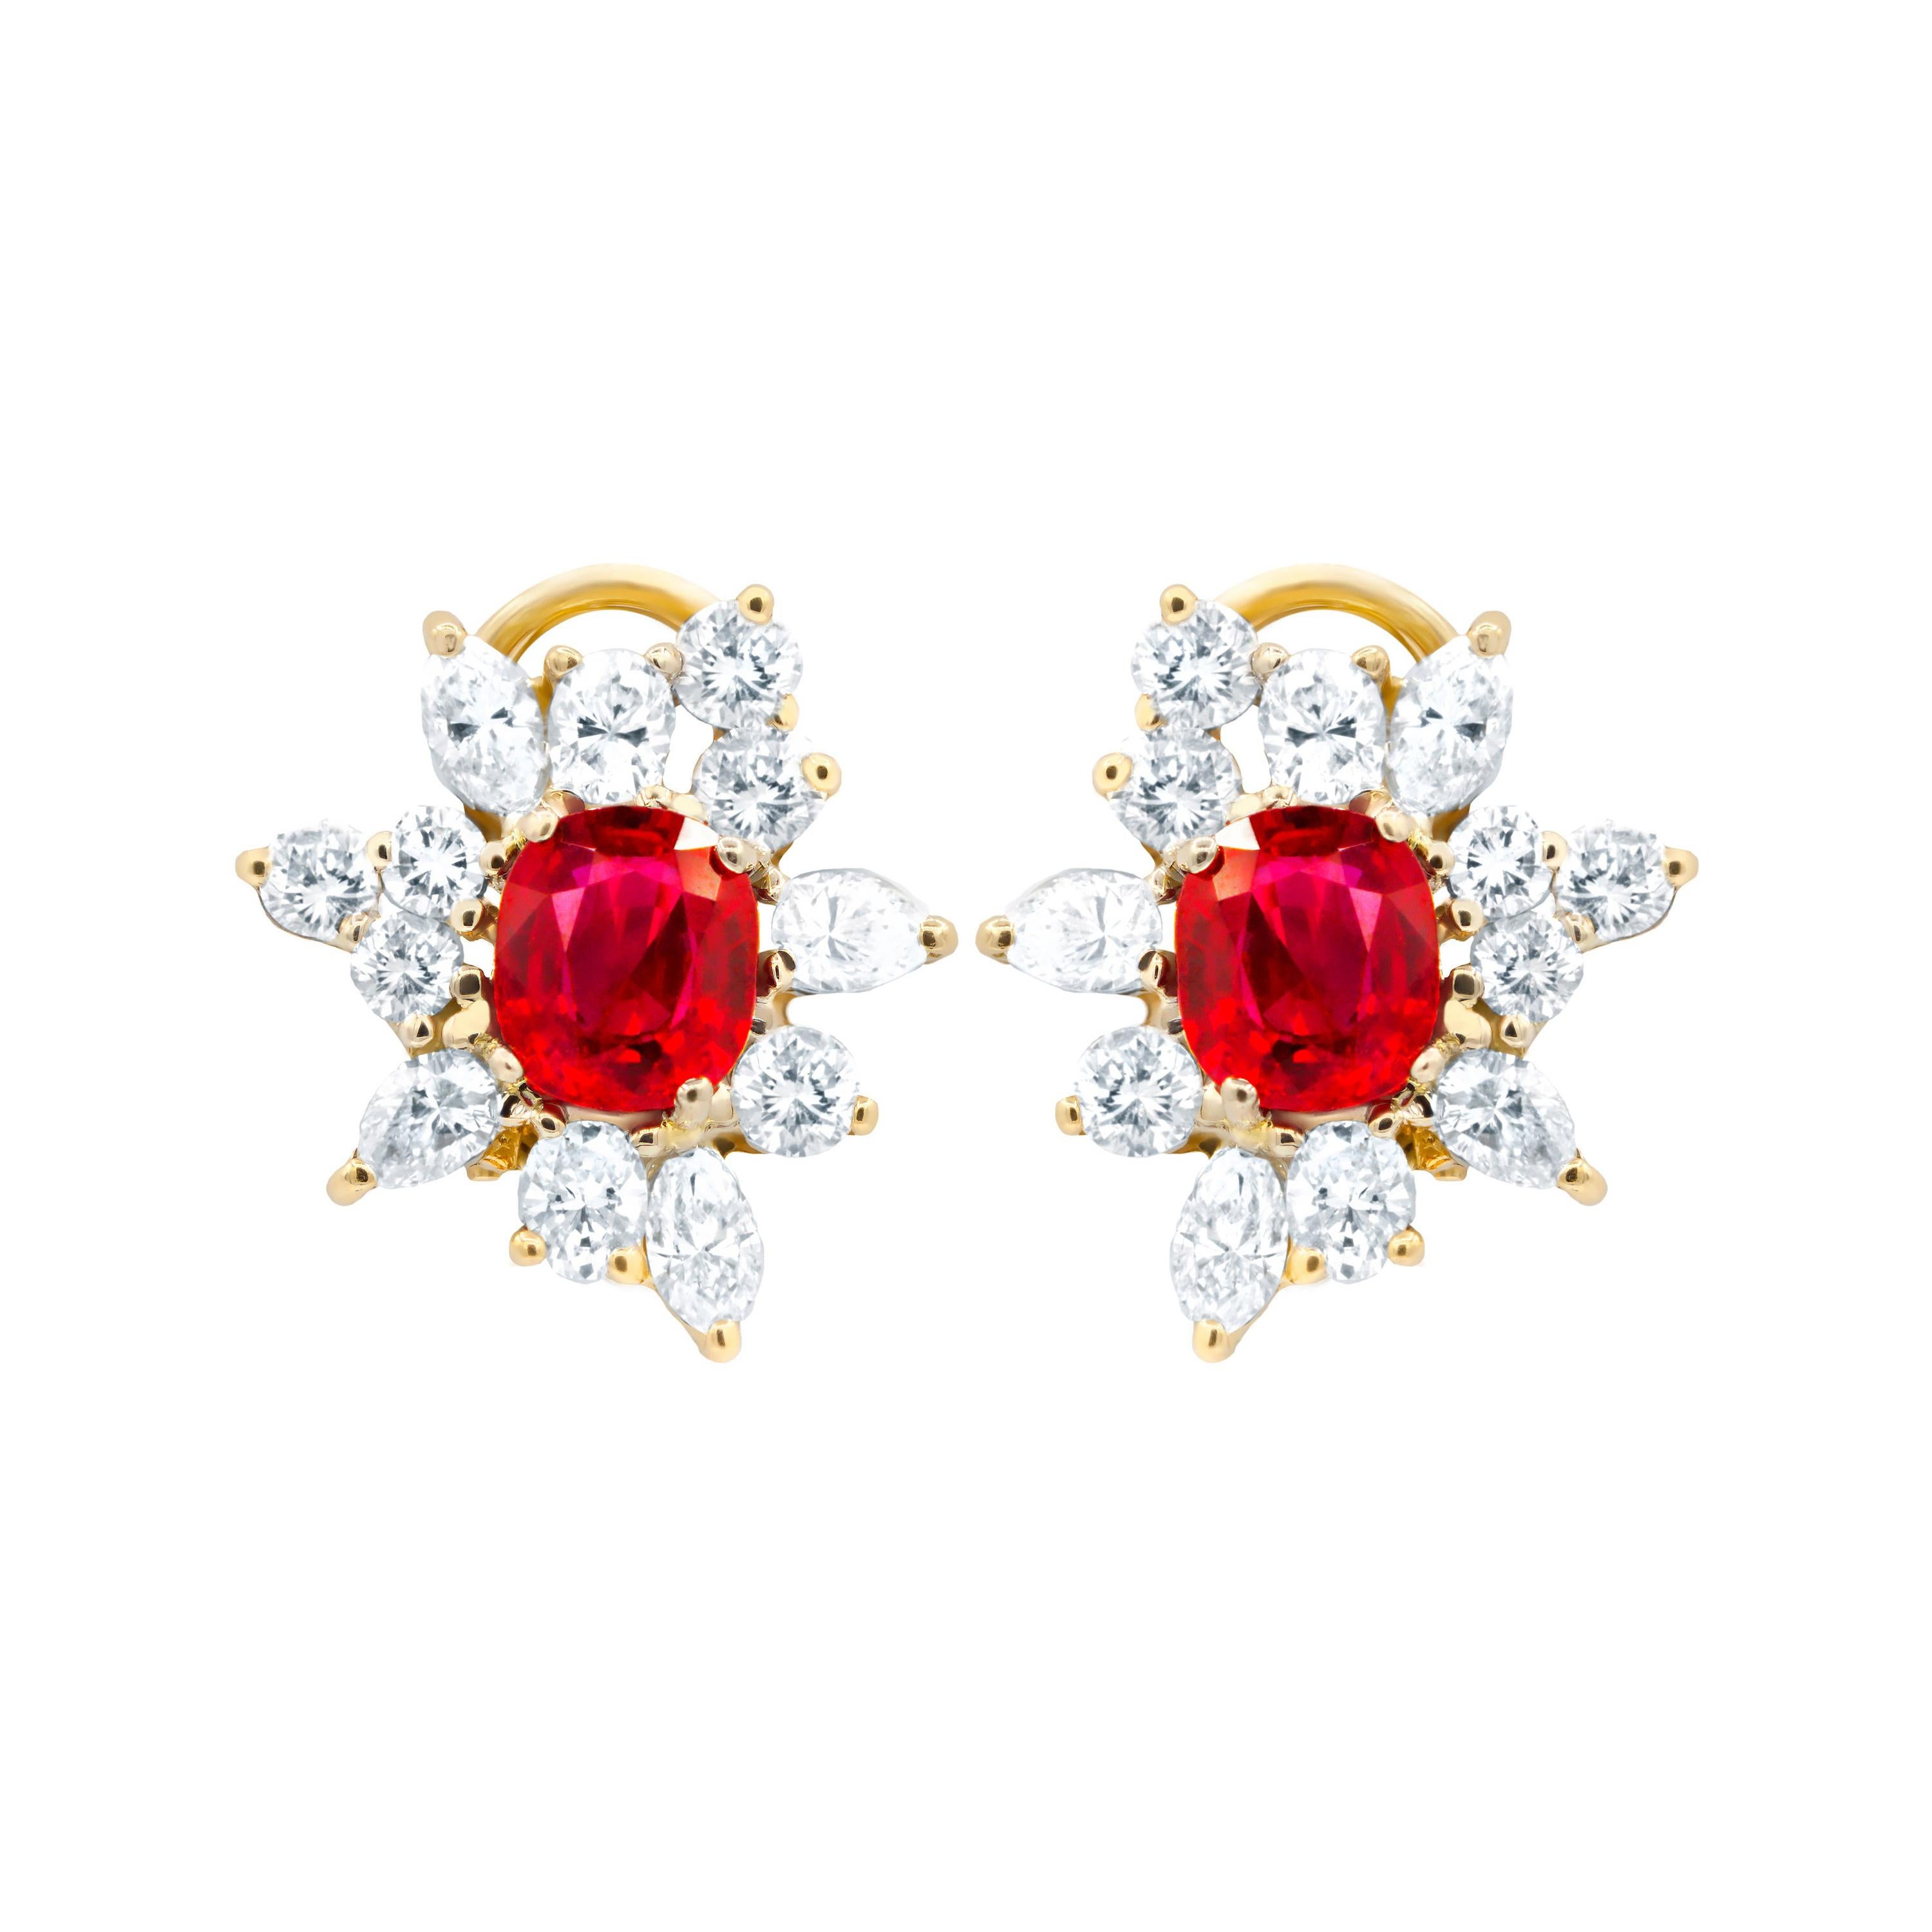 Diana M. 2.65 Carat Ruby and Diamond Snow Flake Earings in Yellow Gold